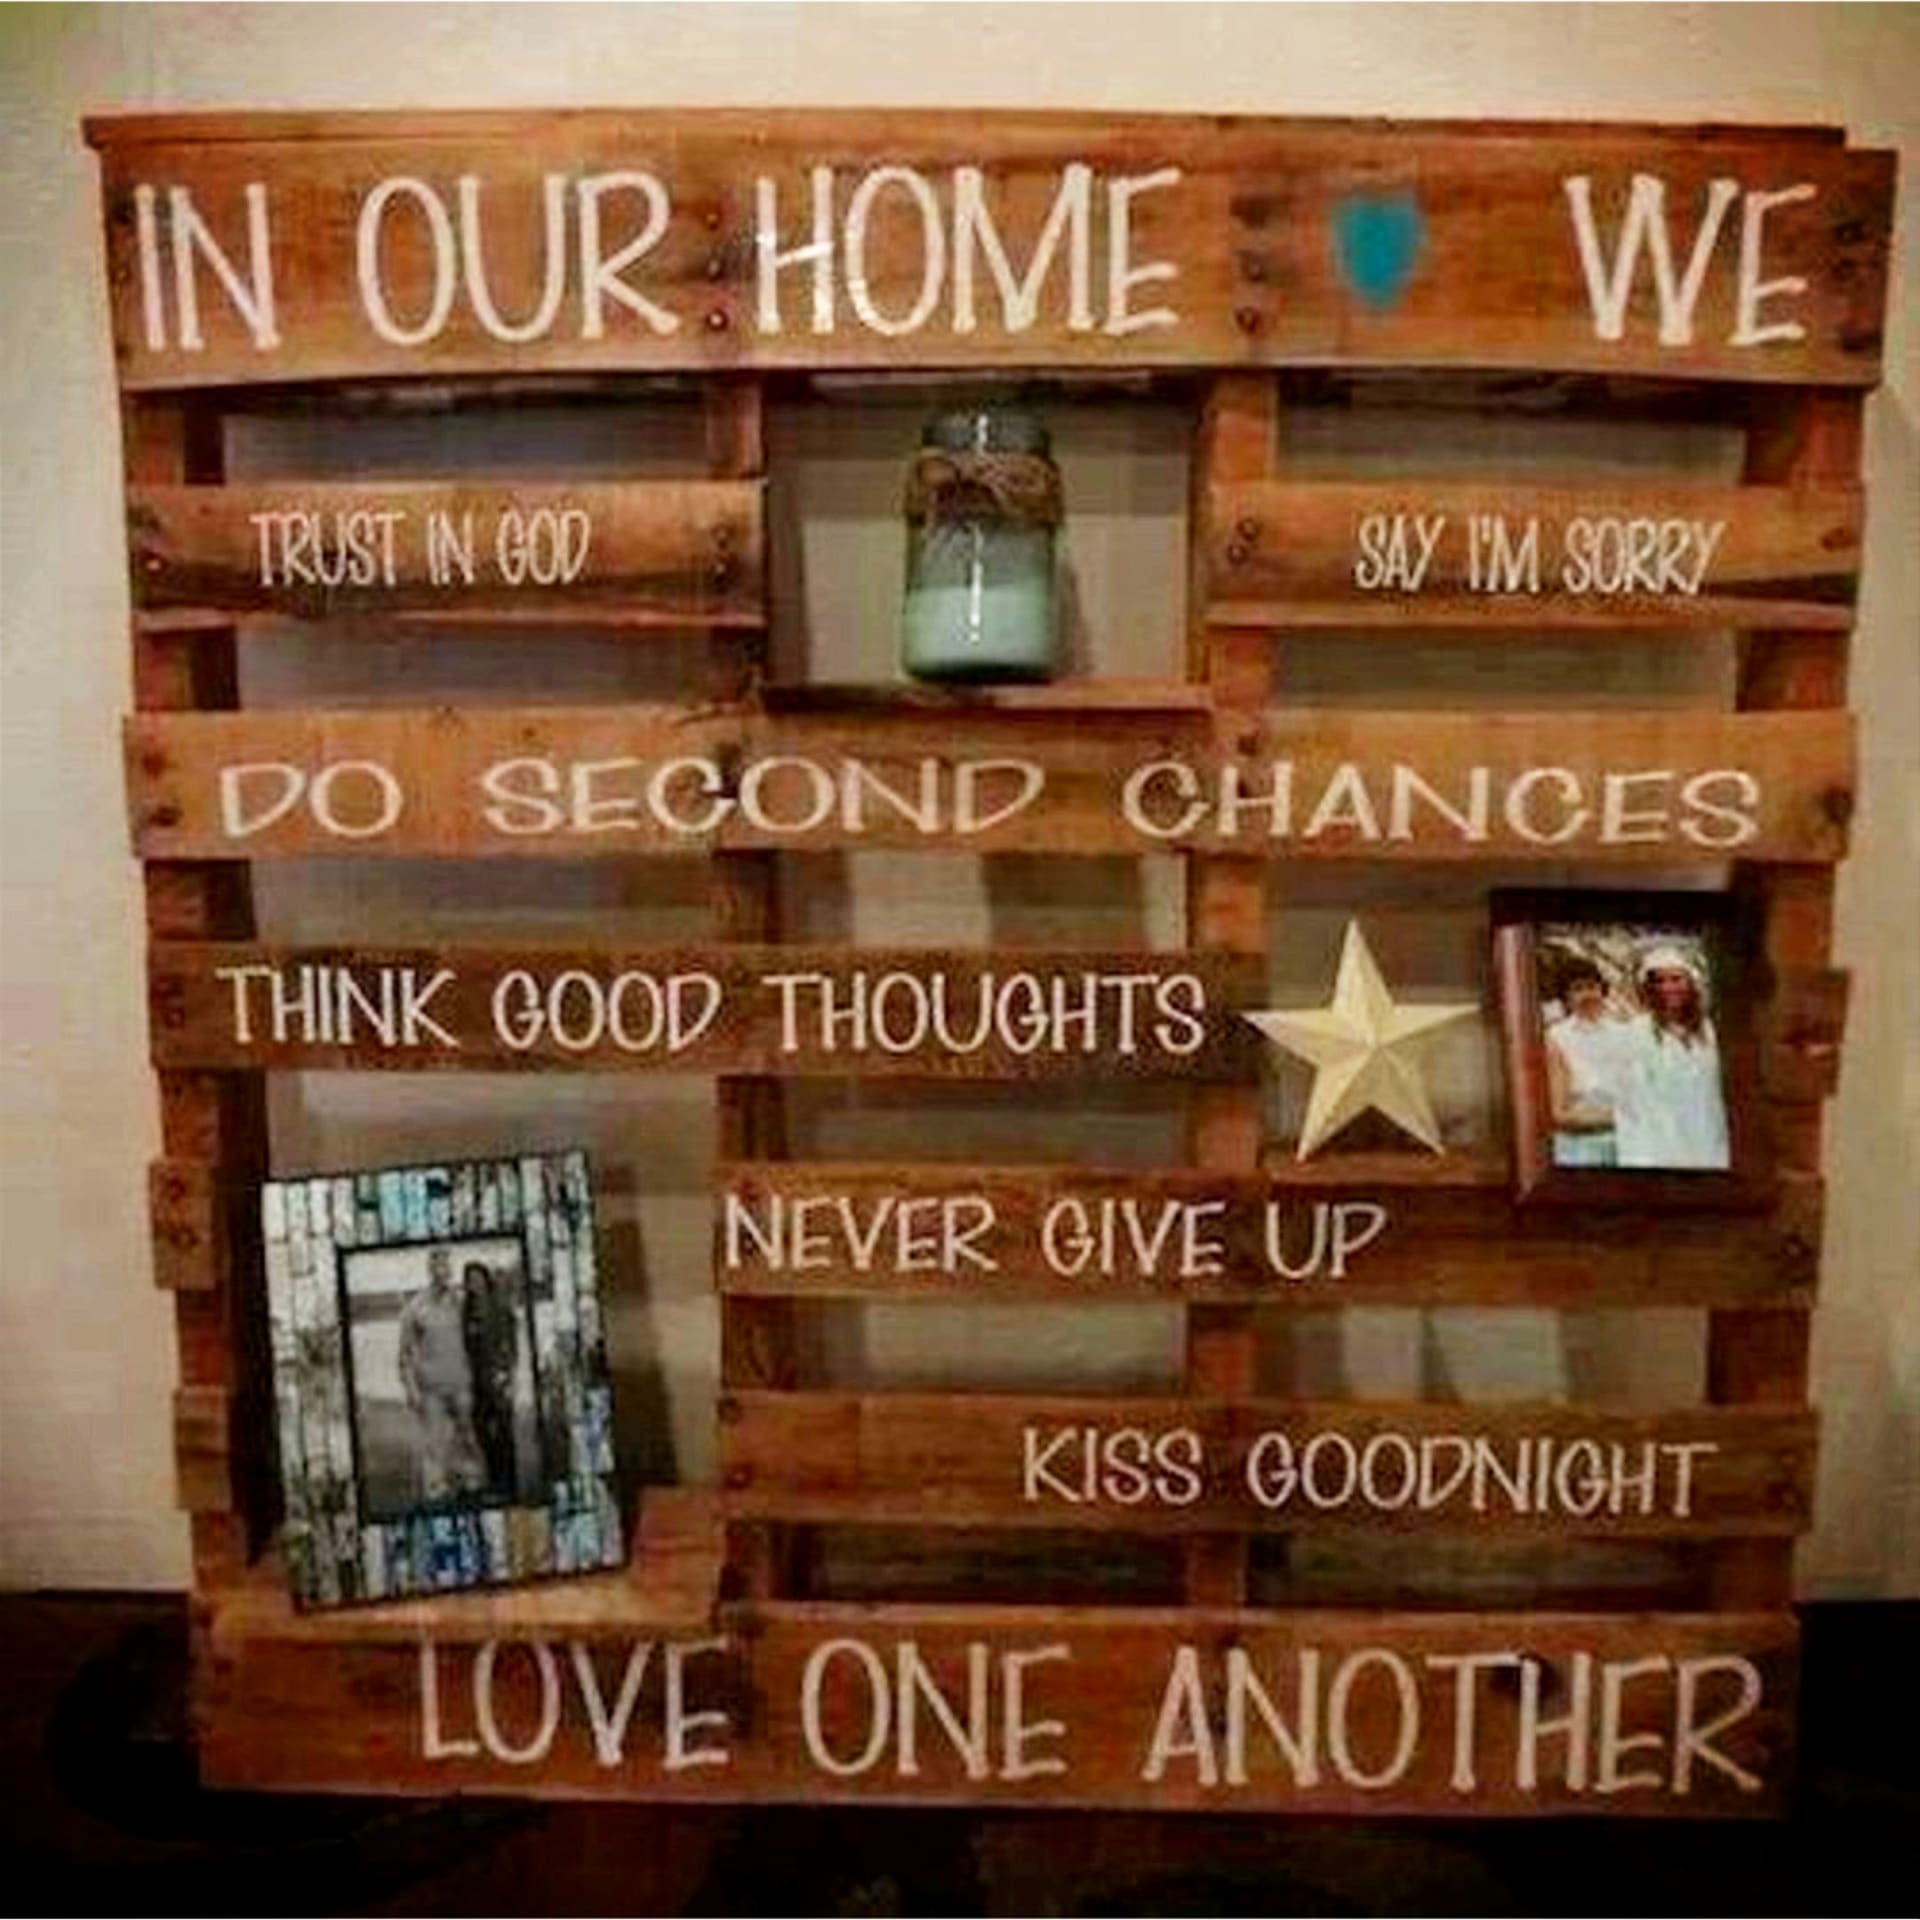 Pallet Projects - easy pallet projects ideas to make or sell - DIY pallet wall sign 'in our home' saying - makes a great handmade gift too